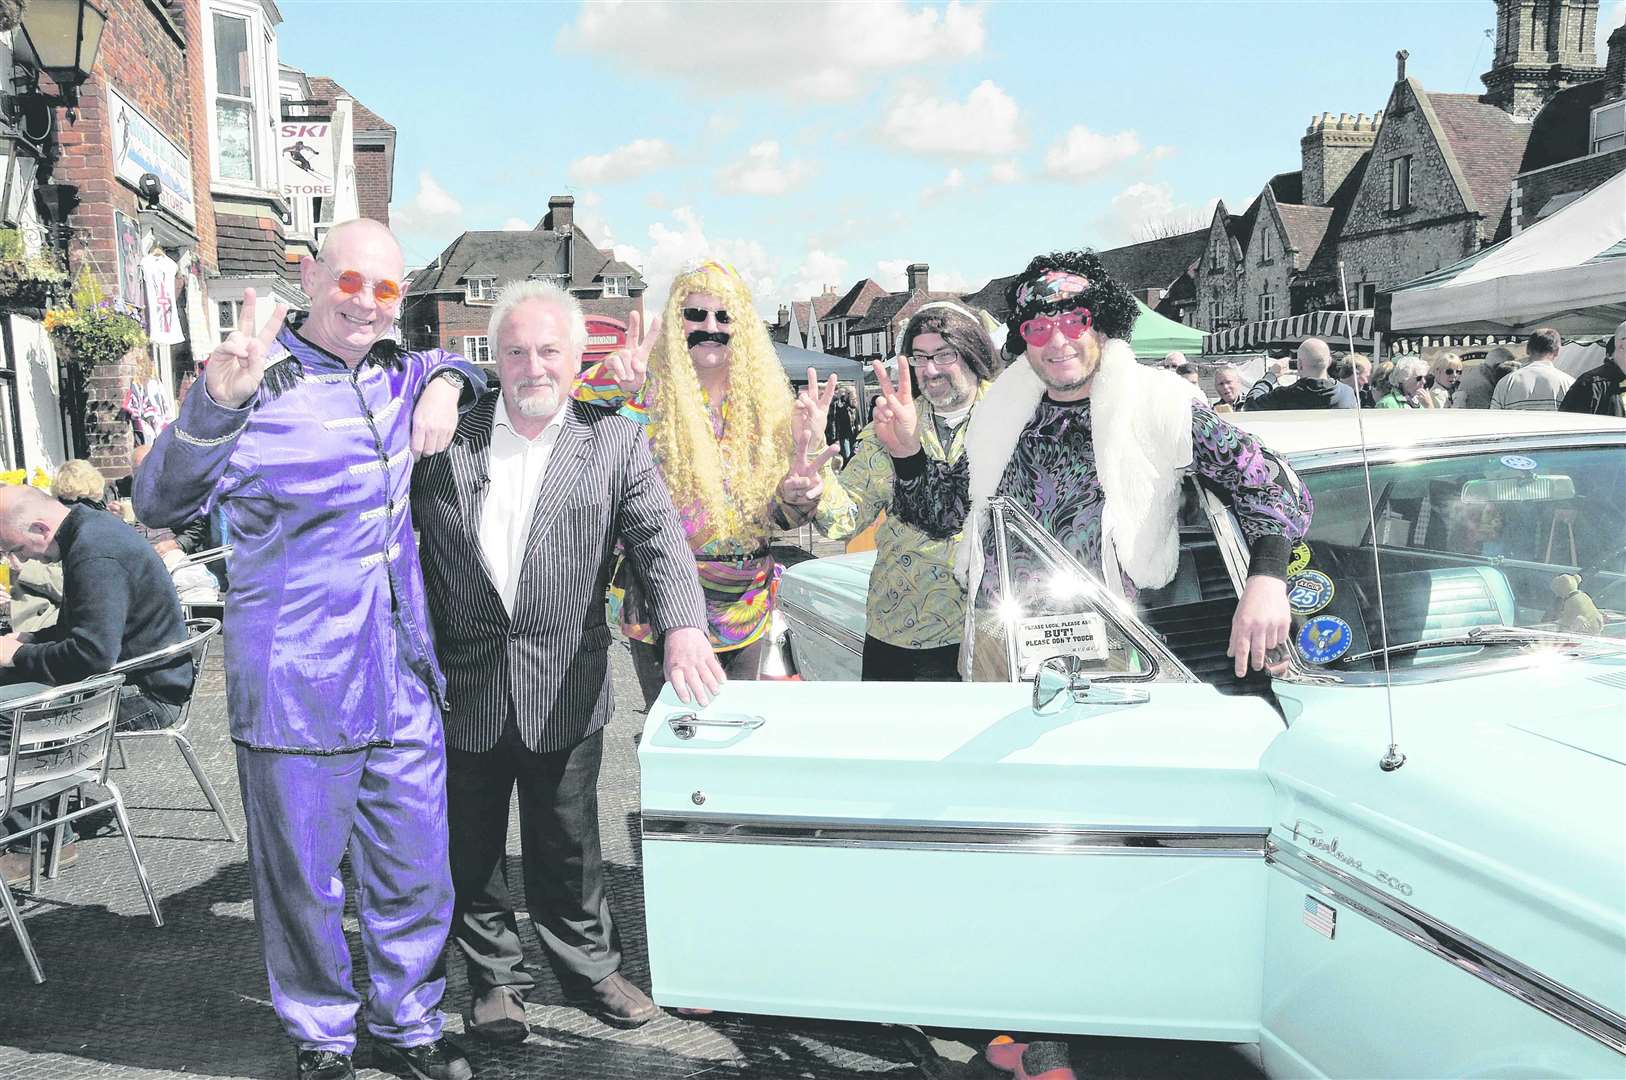 Tim Baldock is surrounded by extras from the film remembering when The Beatles Magical Mystery Tour came to town